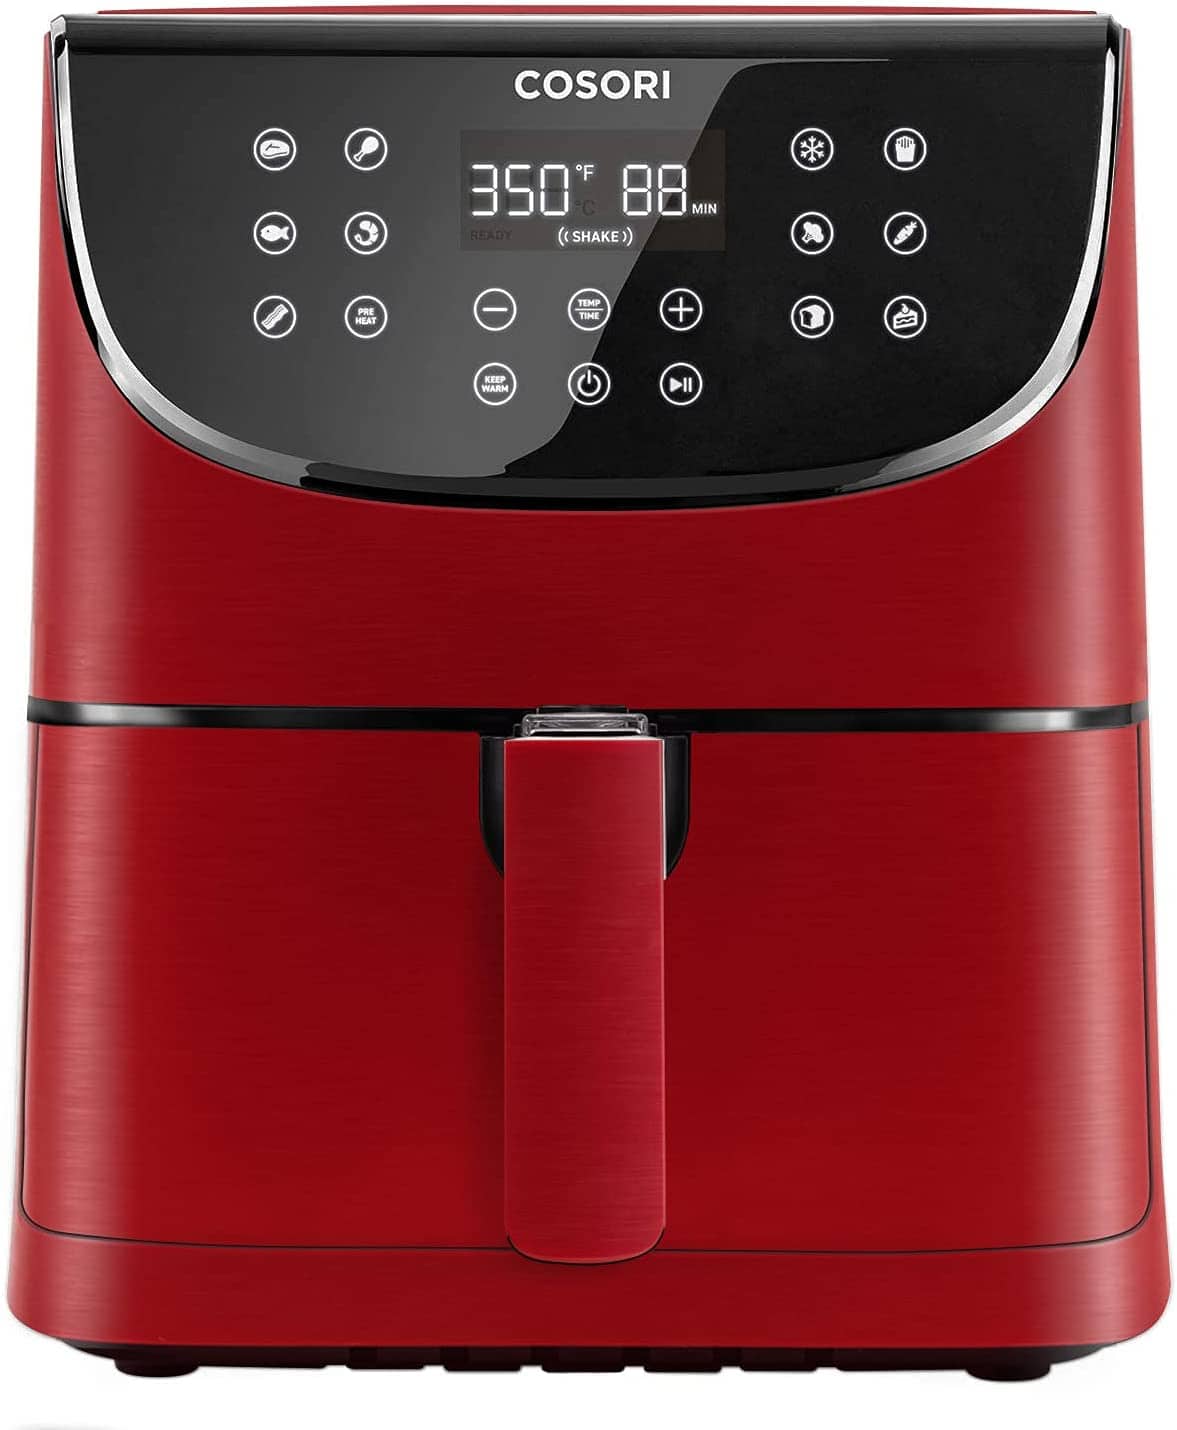 Red Cosori air fryer